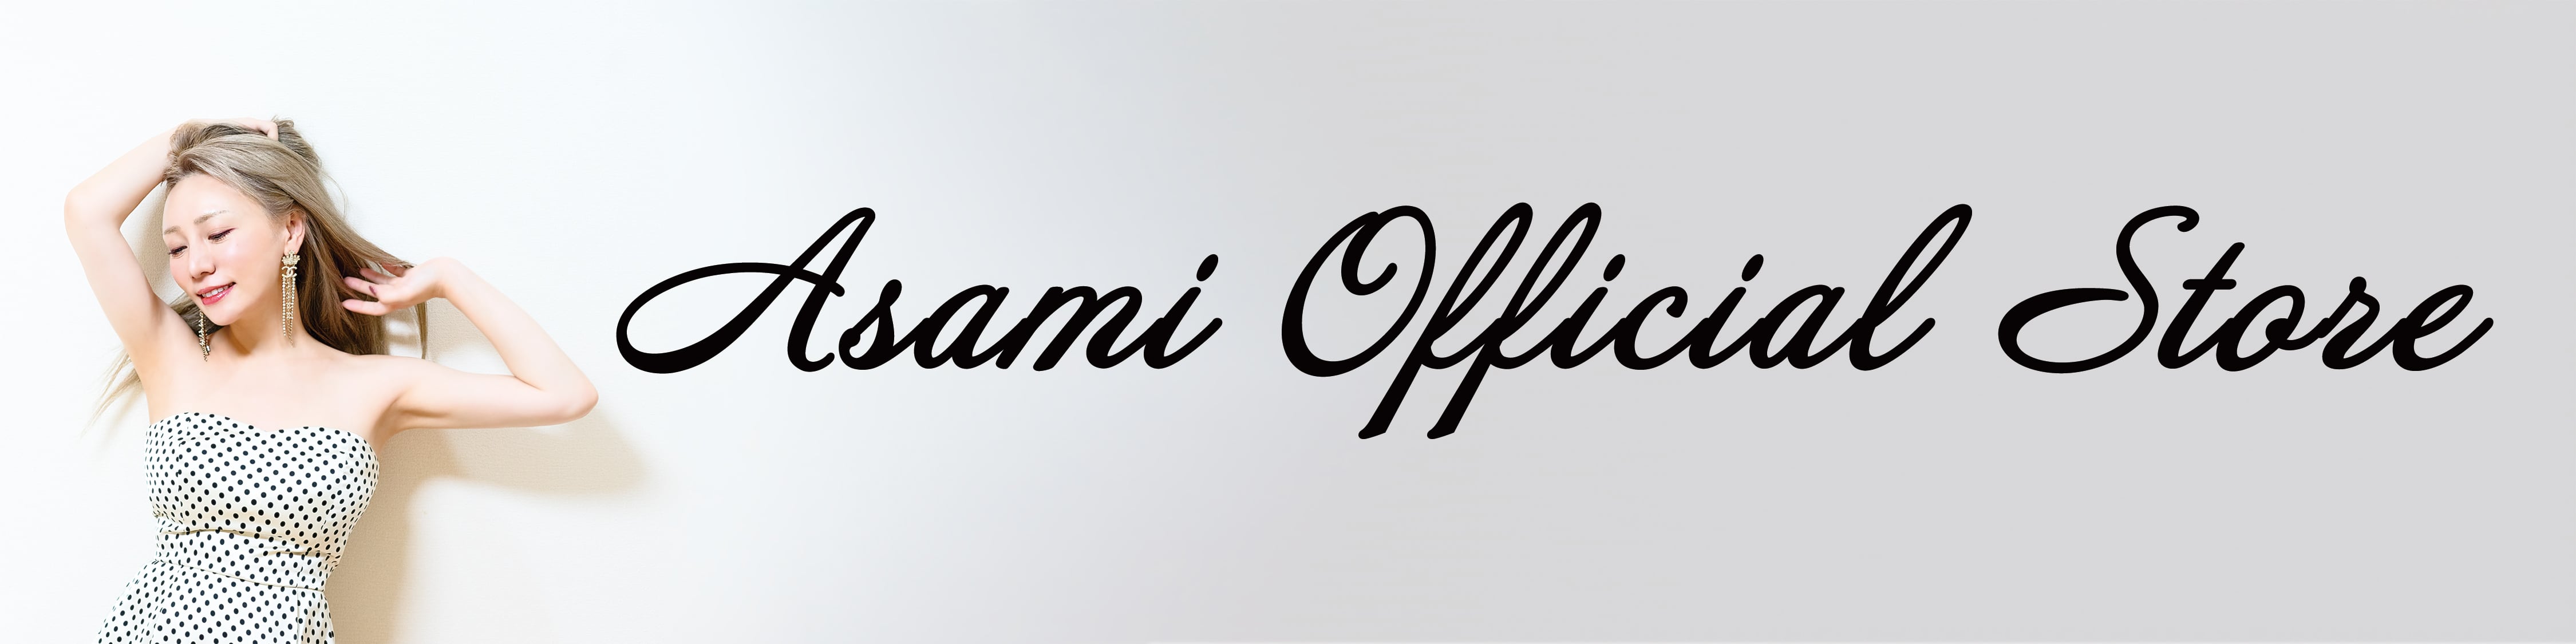  asami Official Store